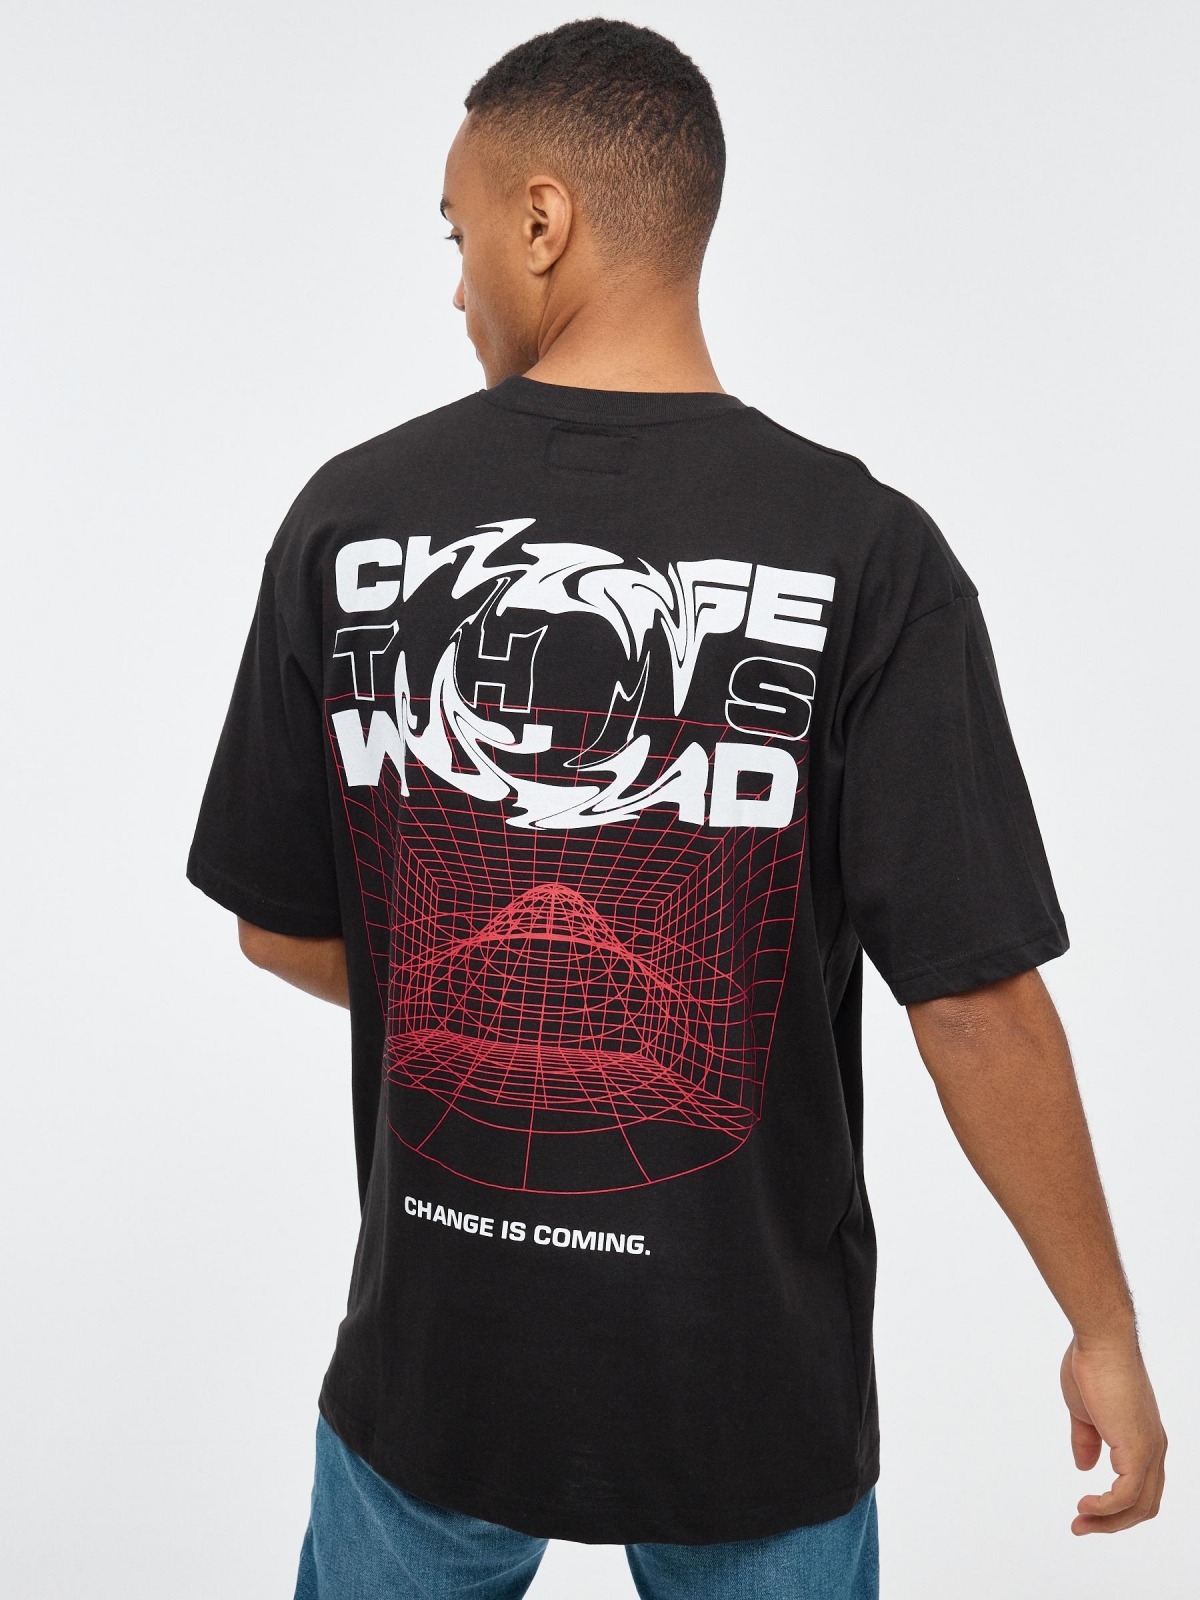 Change The World T-shirt black middle back view